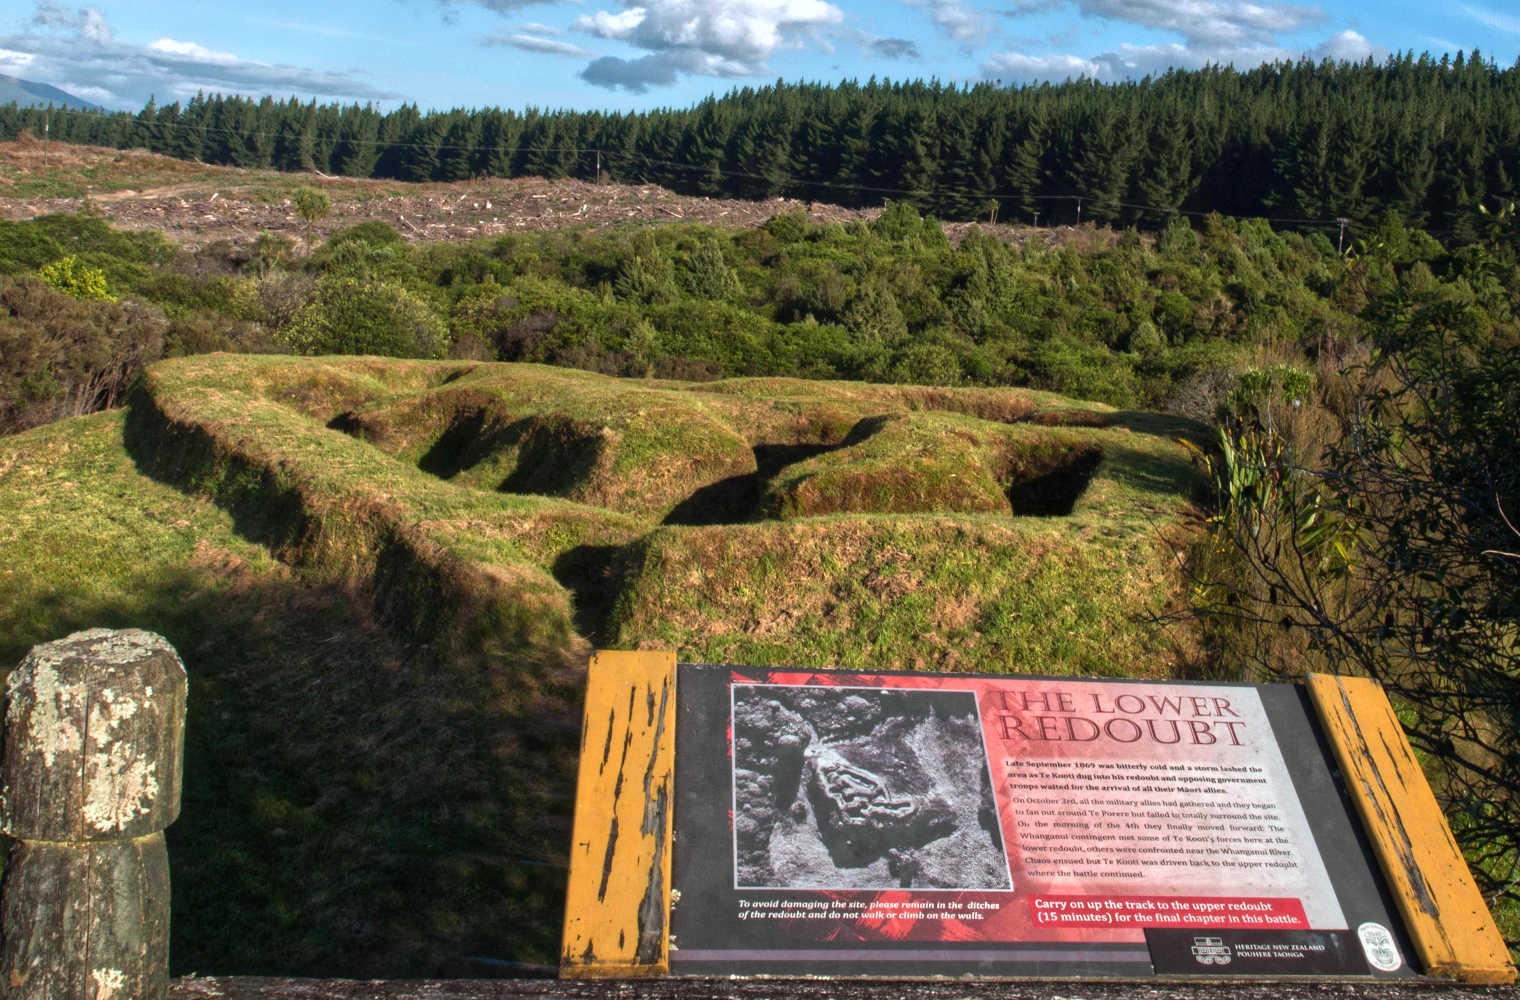 NZ Land Wars heritage sites, Te Porere, the earthworks of the lower redoubt, Taupo, North Island, New Zealand